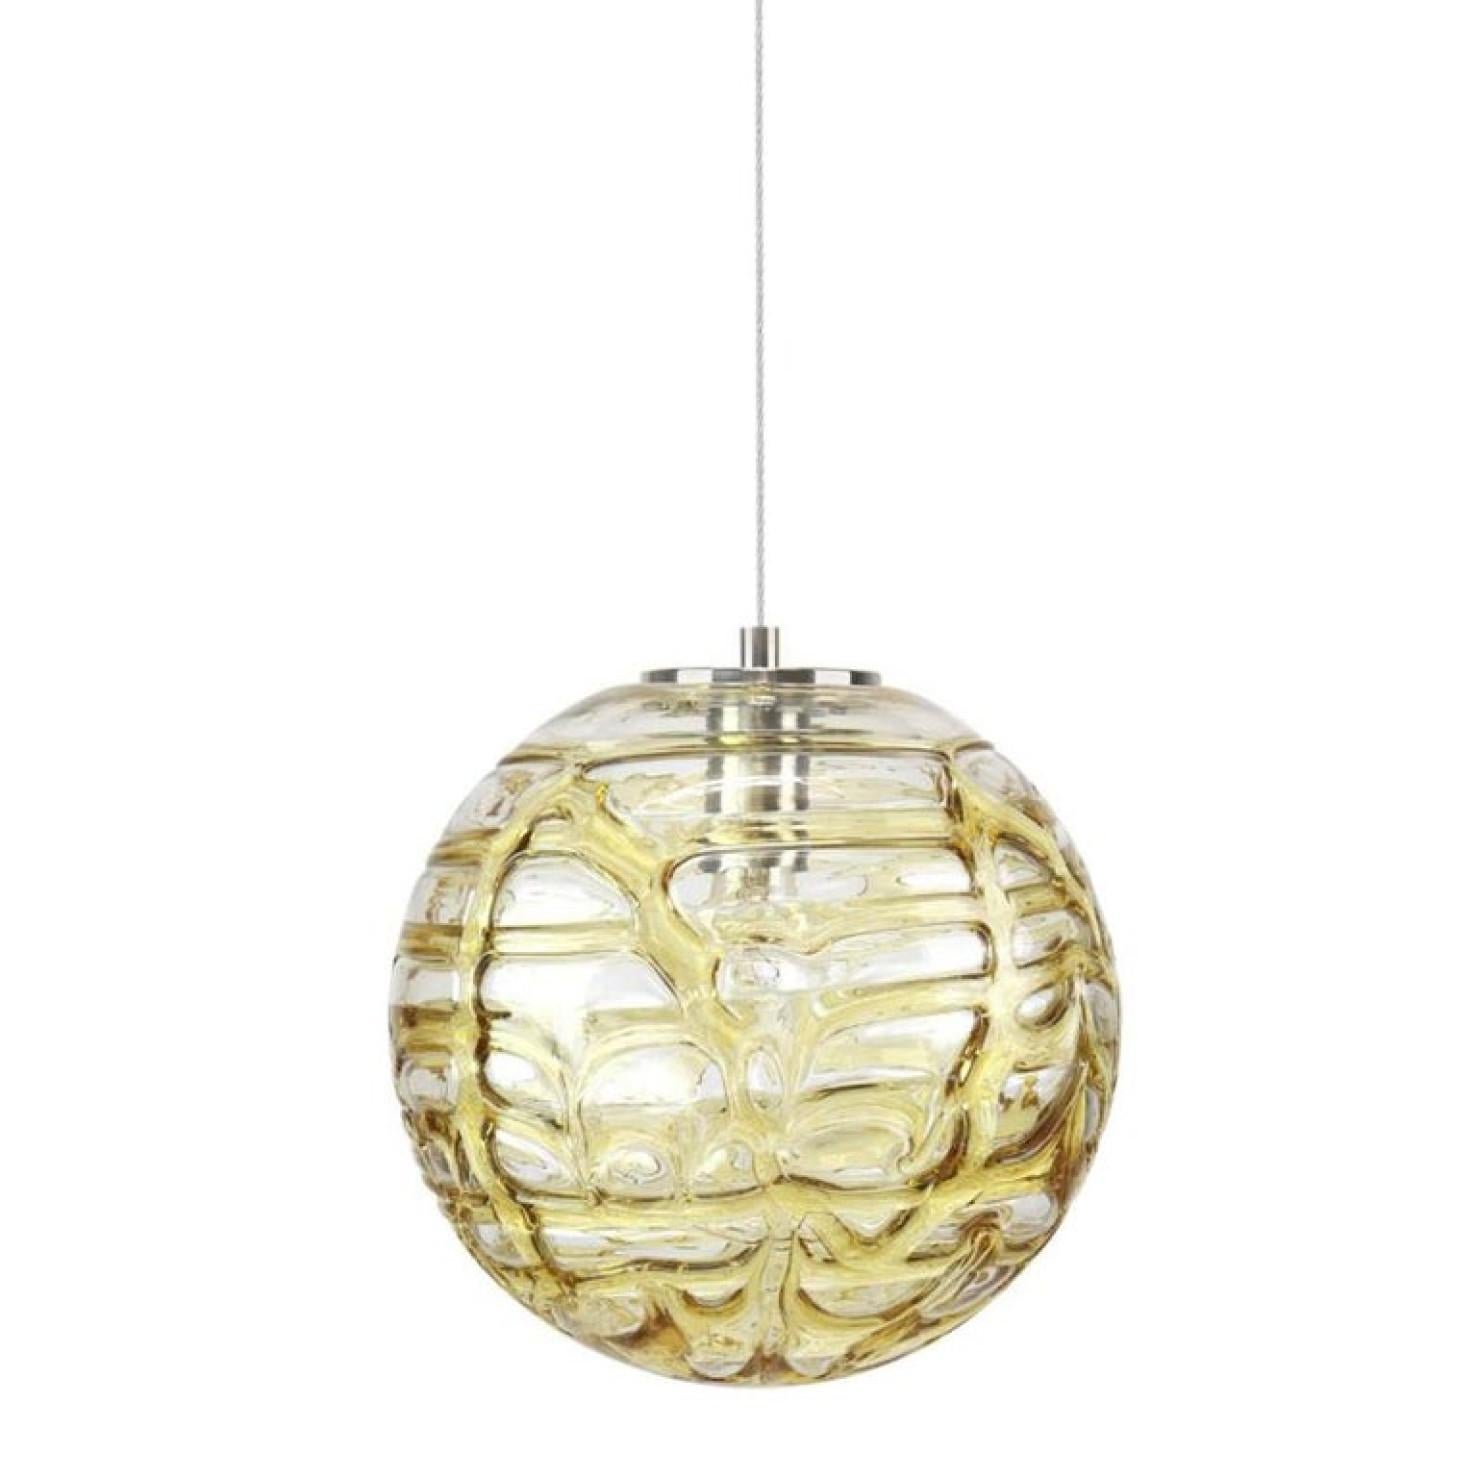 Other Exceptional Set of 3 Murano Glass Pendant Lights Venini Style, 1960s For Sale